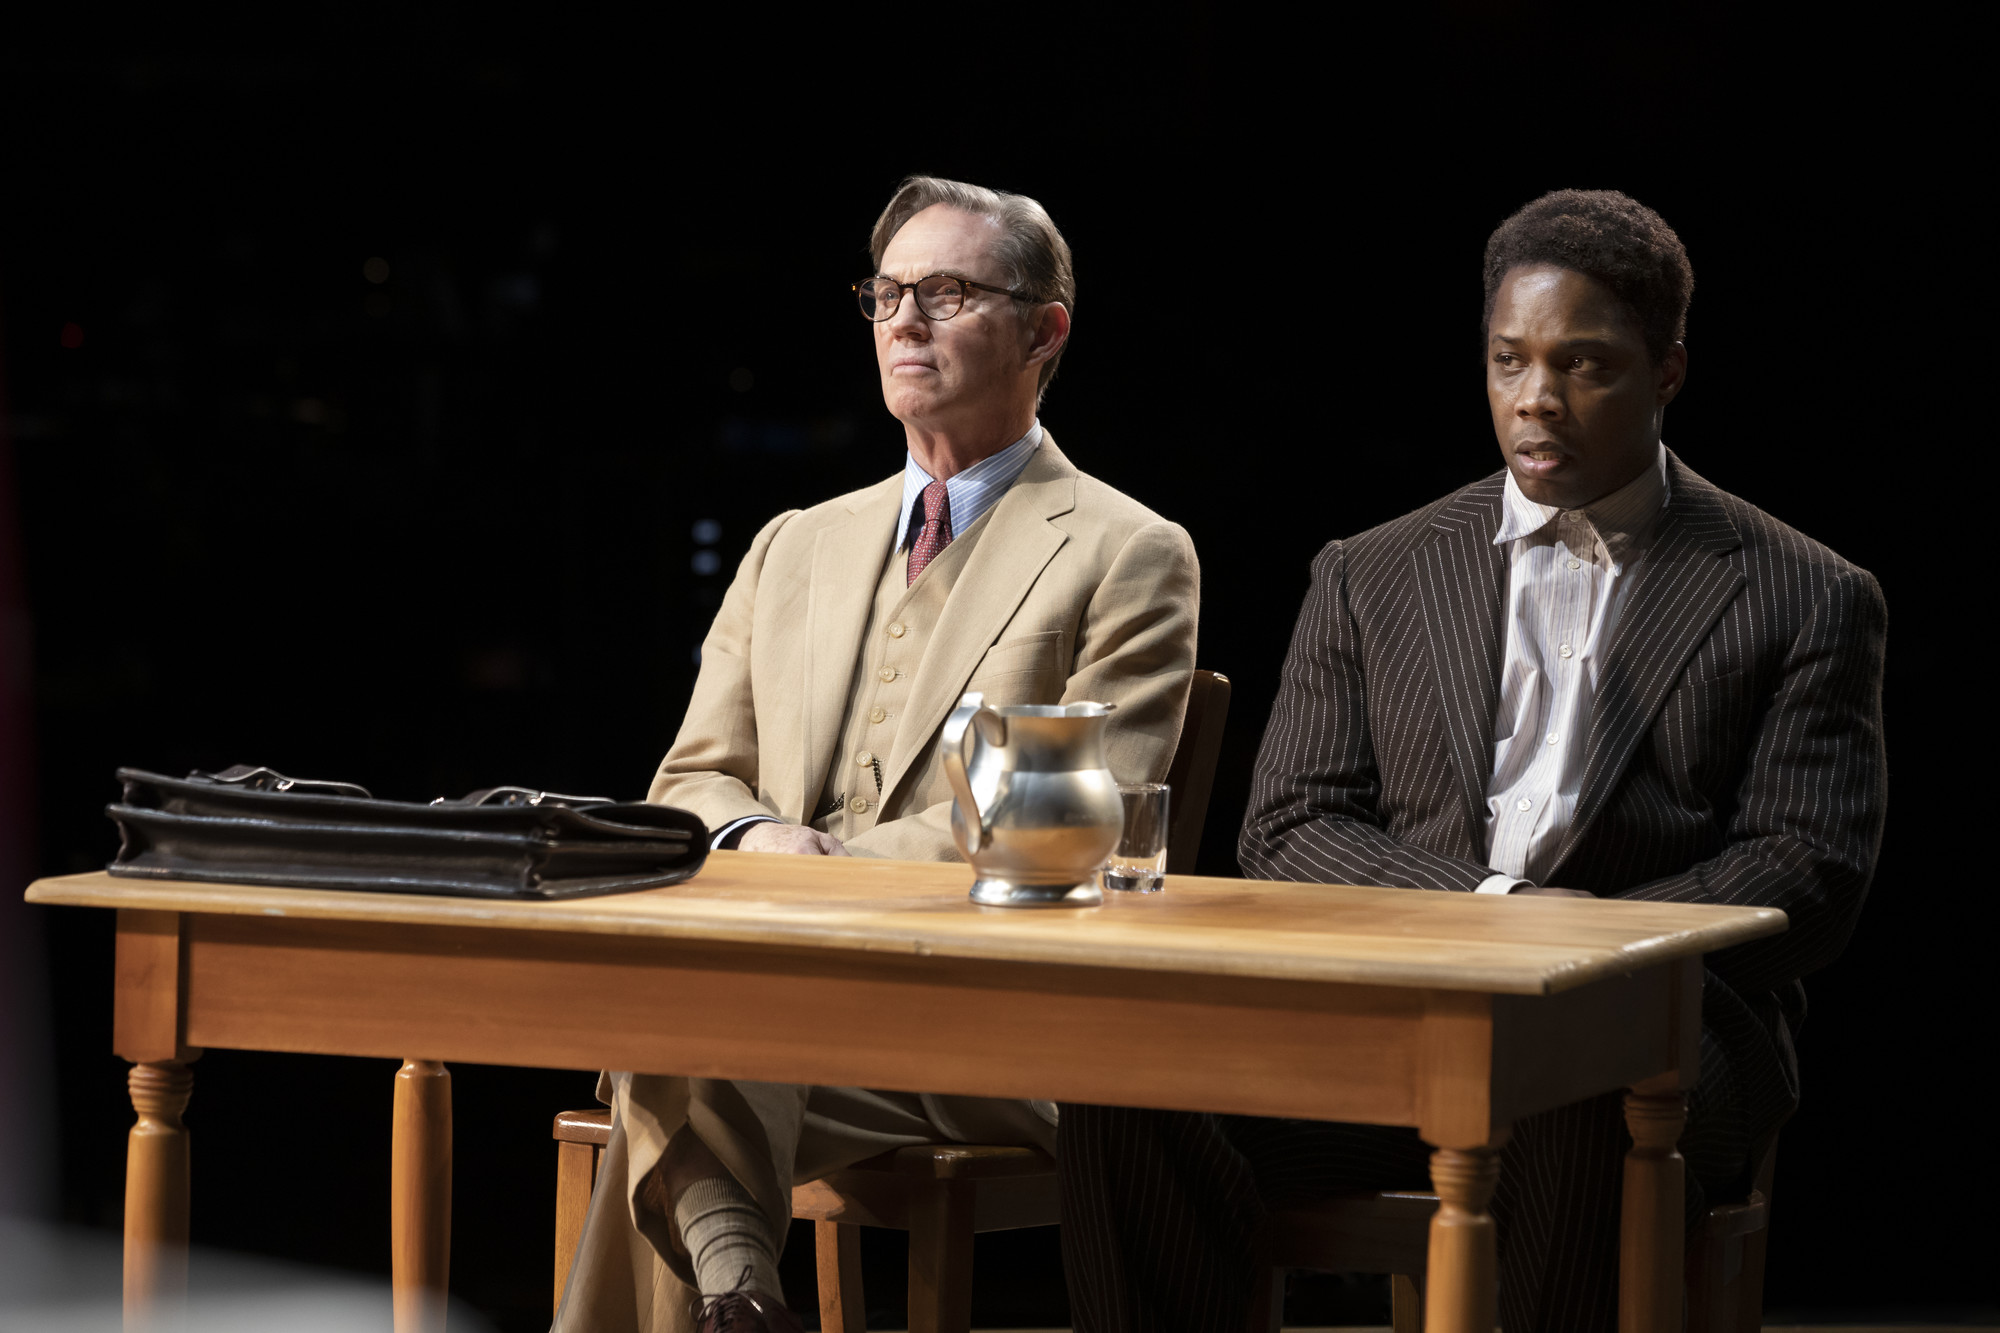 In the new 'To Kill a Mockingbird,' treatment of Black persons remains a central issue, but everything's not so black and white. The touring cast has Richard Thomas as Atticus Finch and Yaegel T. Welch as Tom Robinson. (photo: Julieta Cervantes)